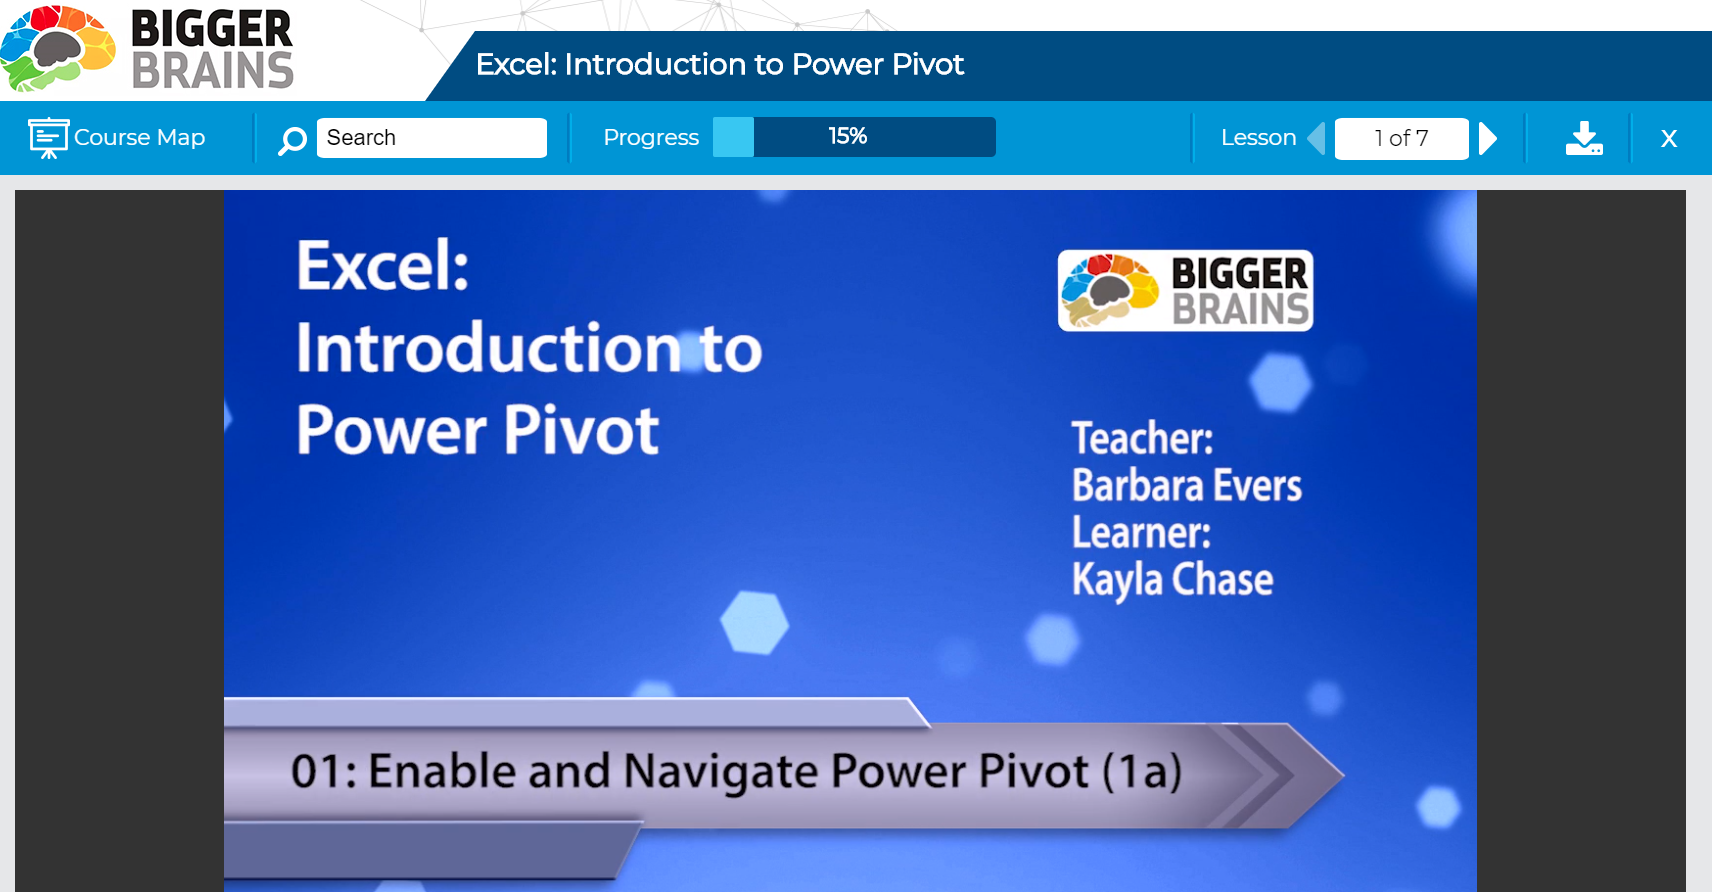 Excel: Introduction to PowerPivot